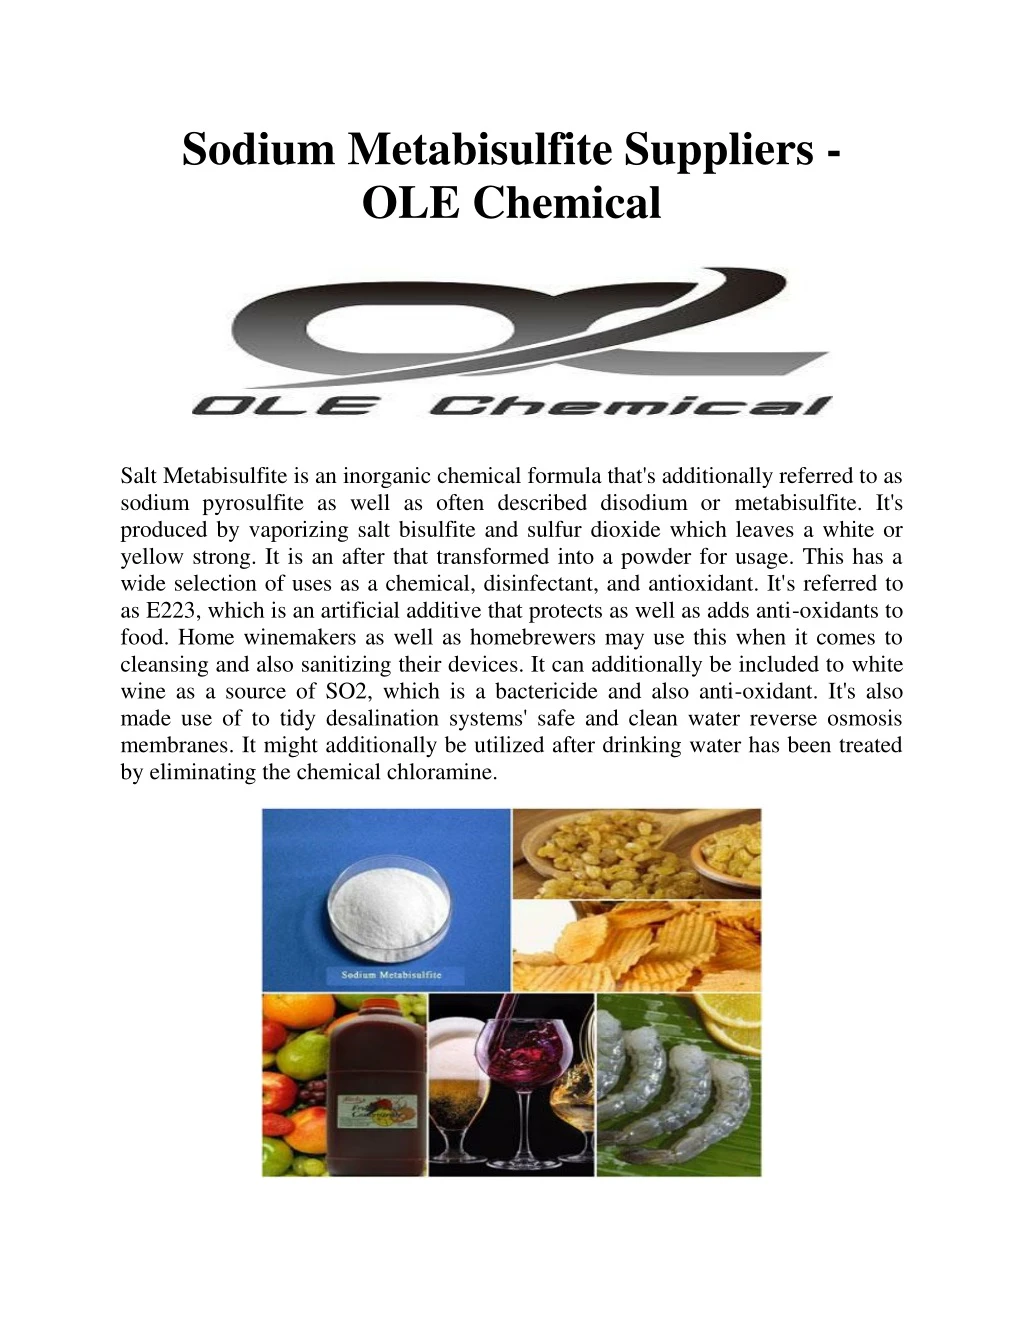 sodium metabisulfite suppliers ole chemical